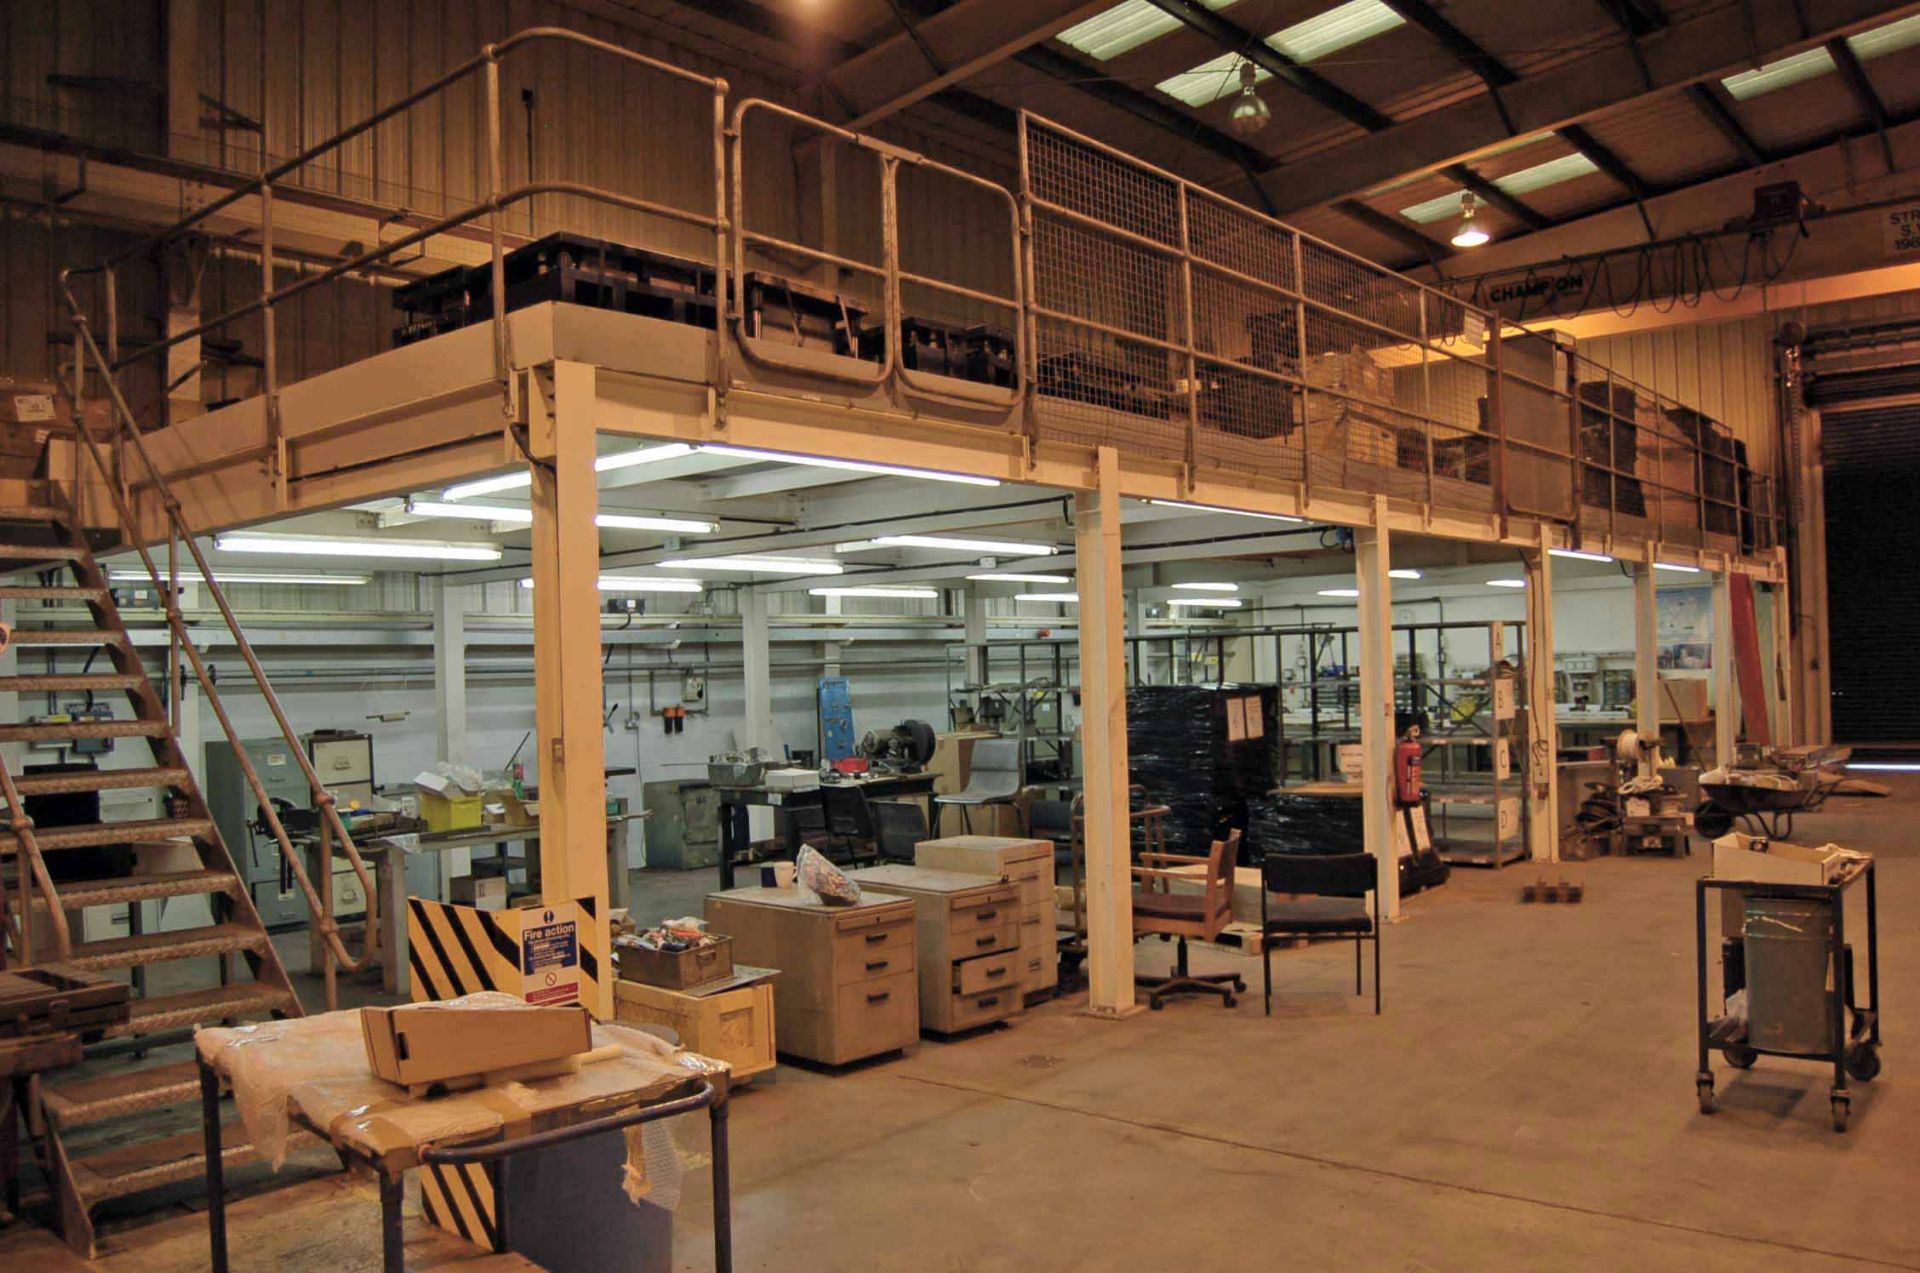 An Approx. 18M x 6M Bolted Steel Mezzanine Floor with Two Steel Access Staircases, Safety Hand